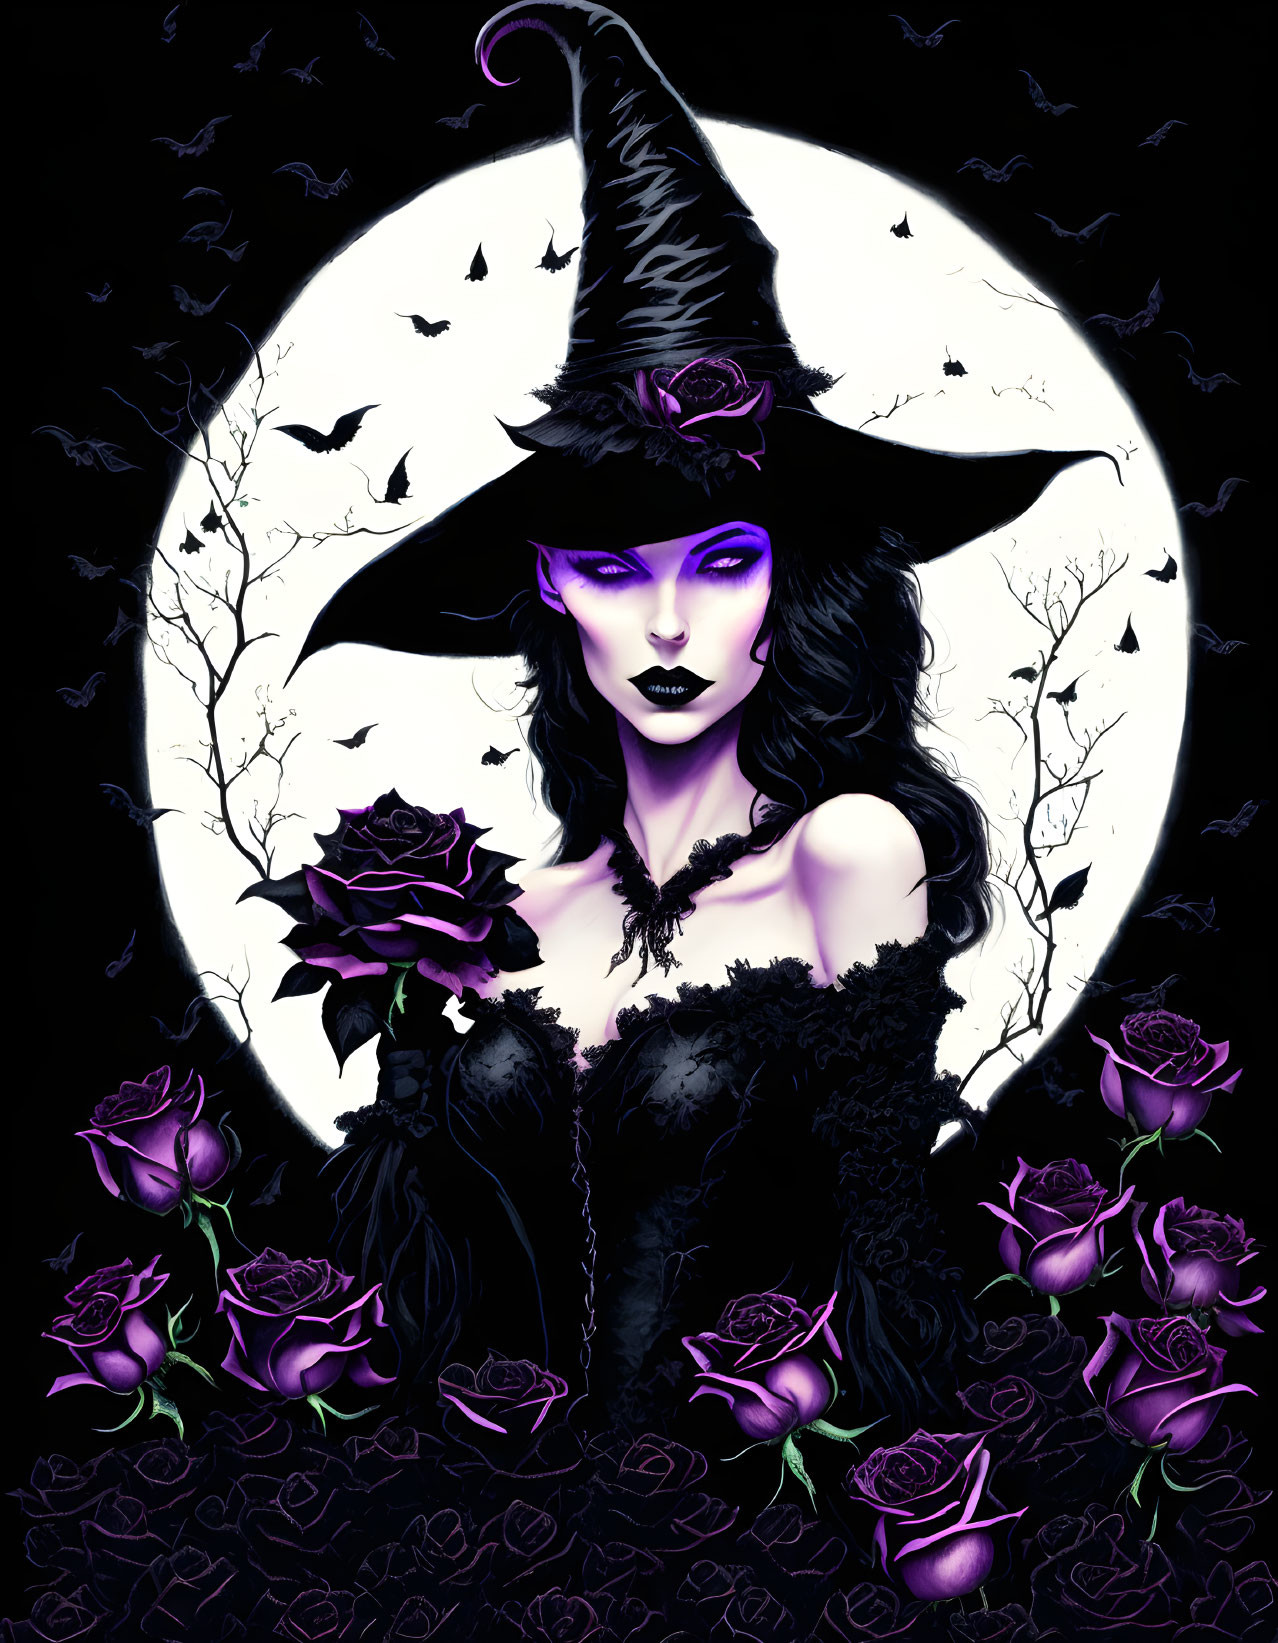 Stylized witch illustration with purple accents, black roses, full moon, bats, bare trees